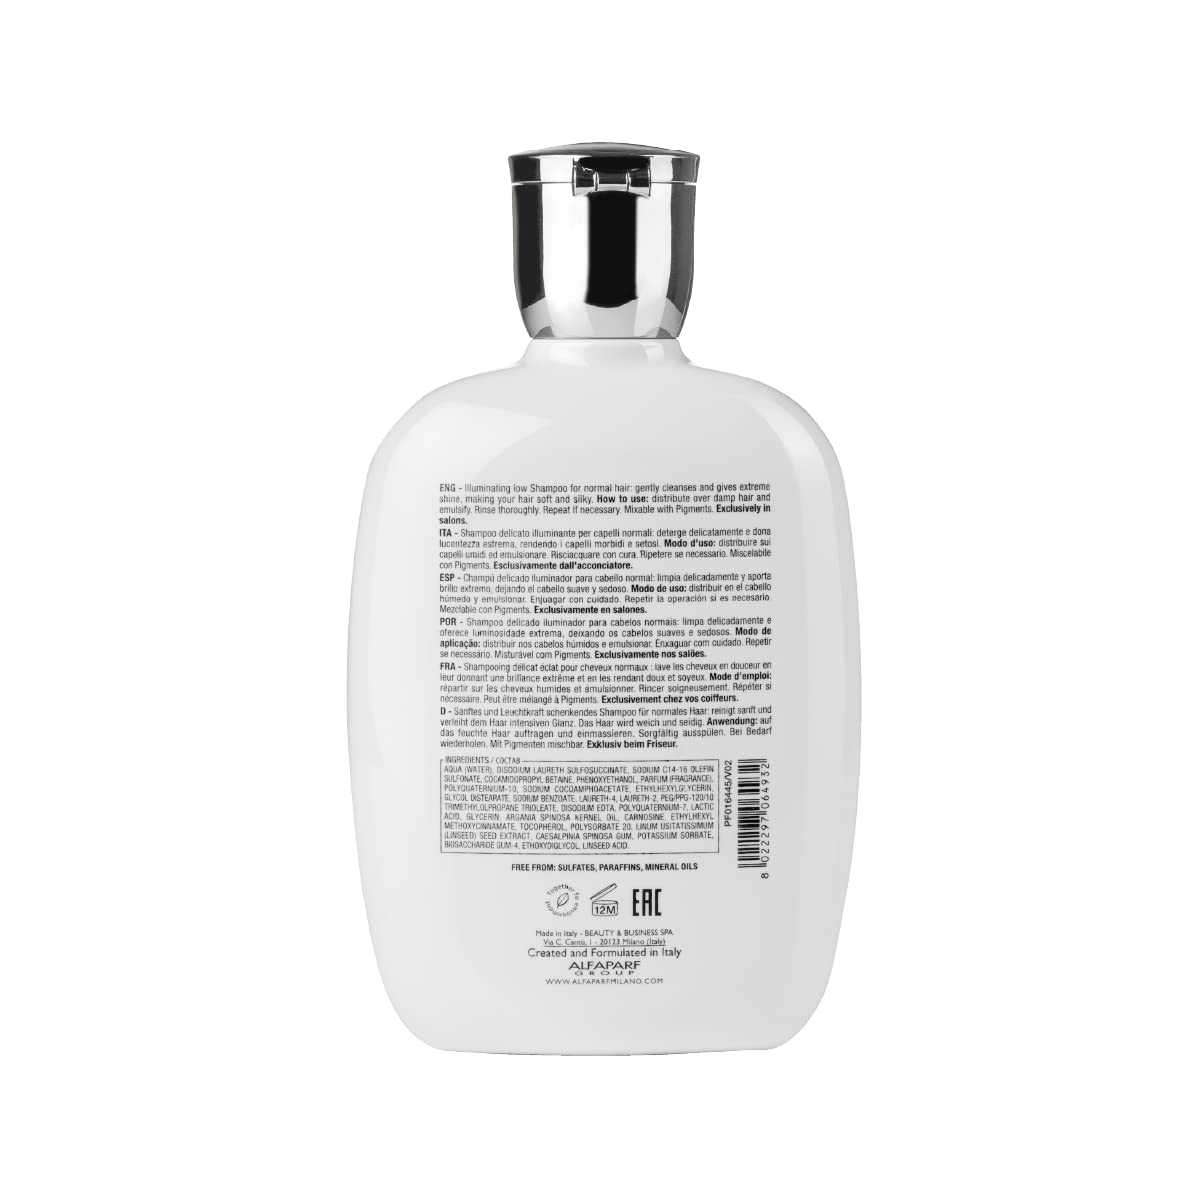 Alfaparf Milano Semi Di Lino Diamond Shine Illuminating Low Shampoo - Sulfate Free - For Normal Hair - Paraben and Paraffin Free - Safe on Color Treated Hair - Professional Salon Quality